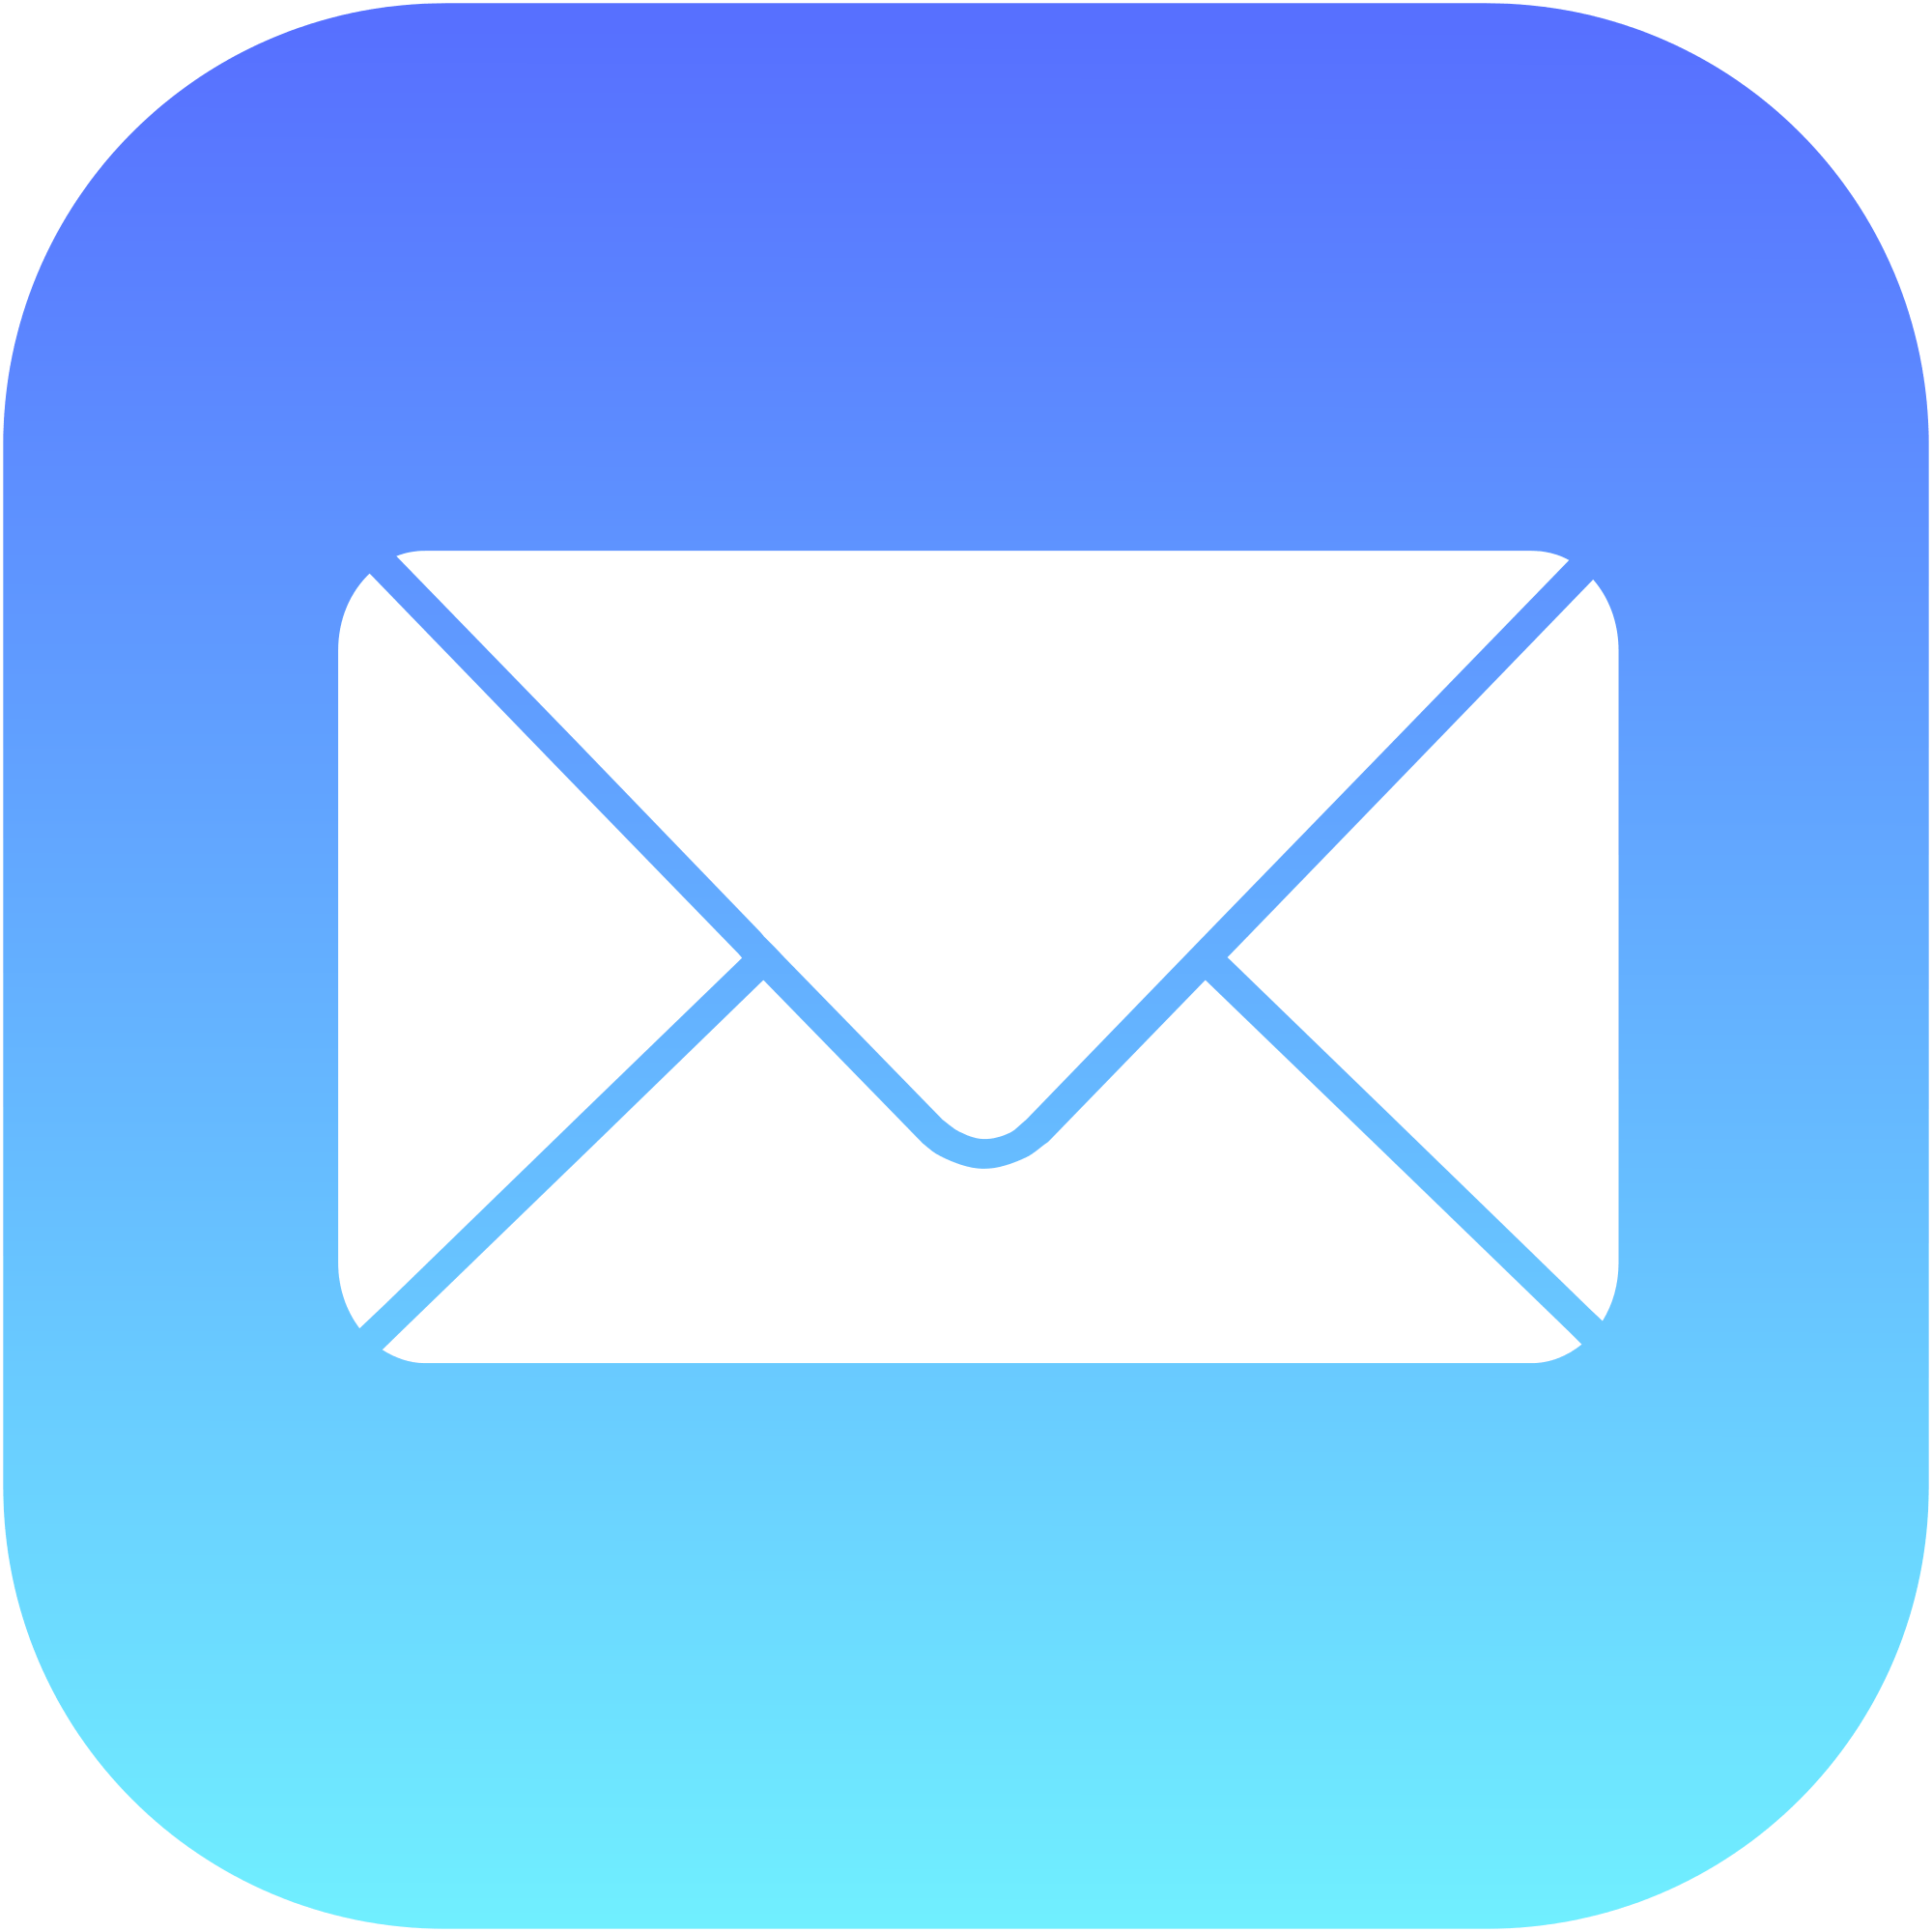 Email App Logo - File:Mail iOS.svg - Wikimedia Commons